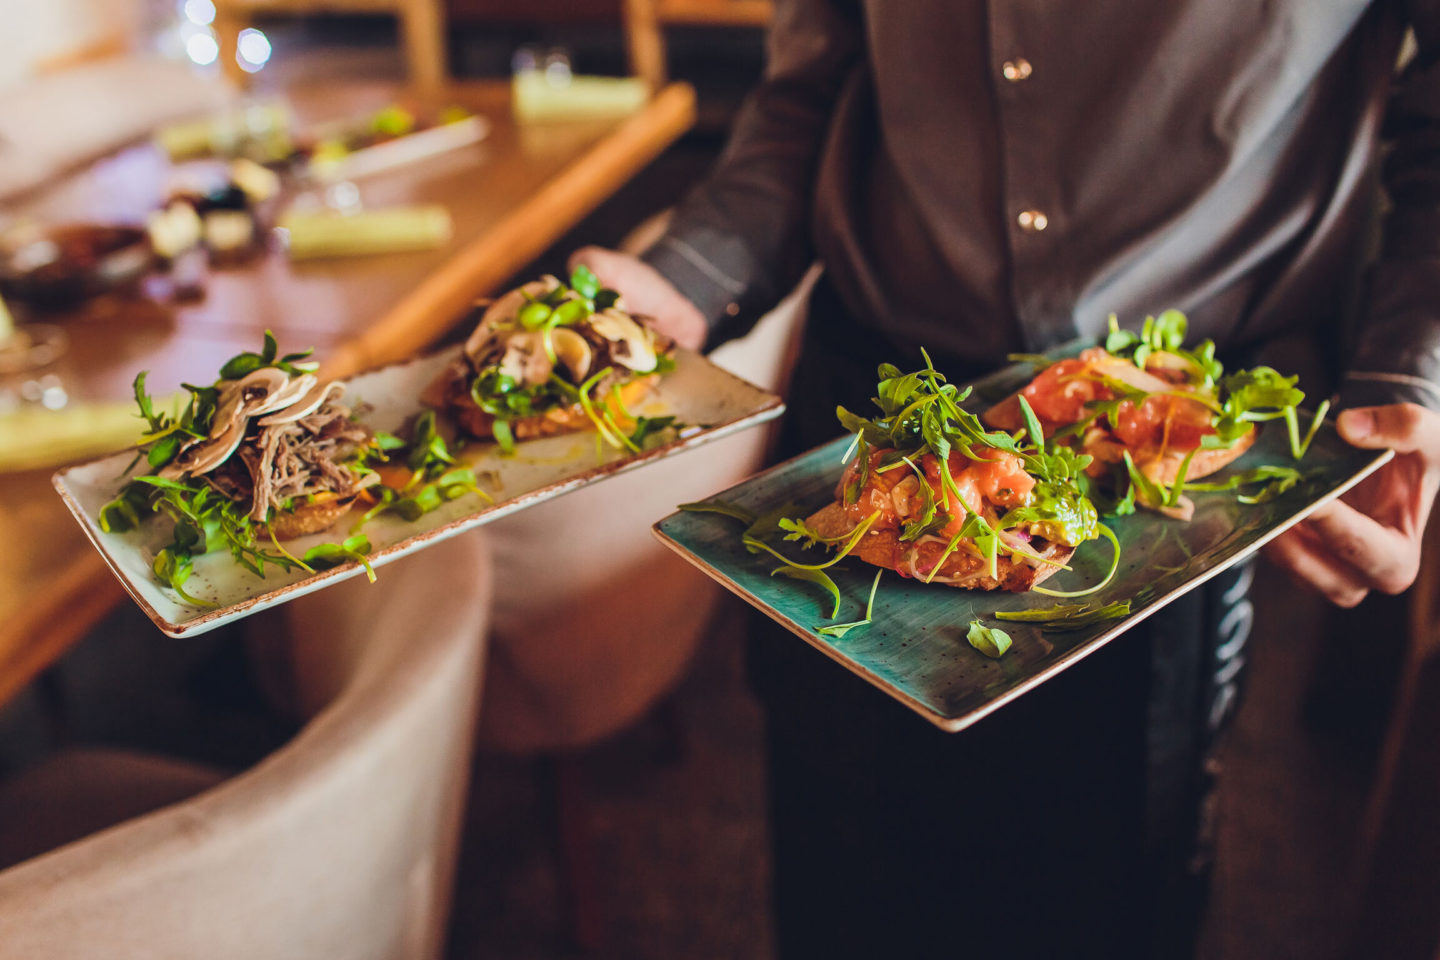 Are Cost of Goods Sold restaurant insights enough for your operation?